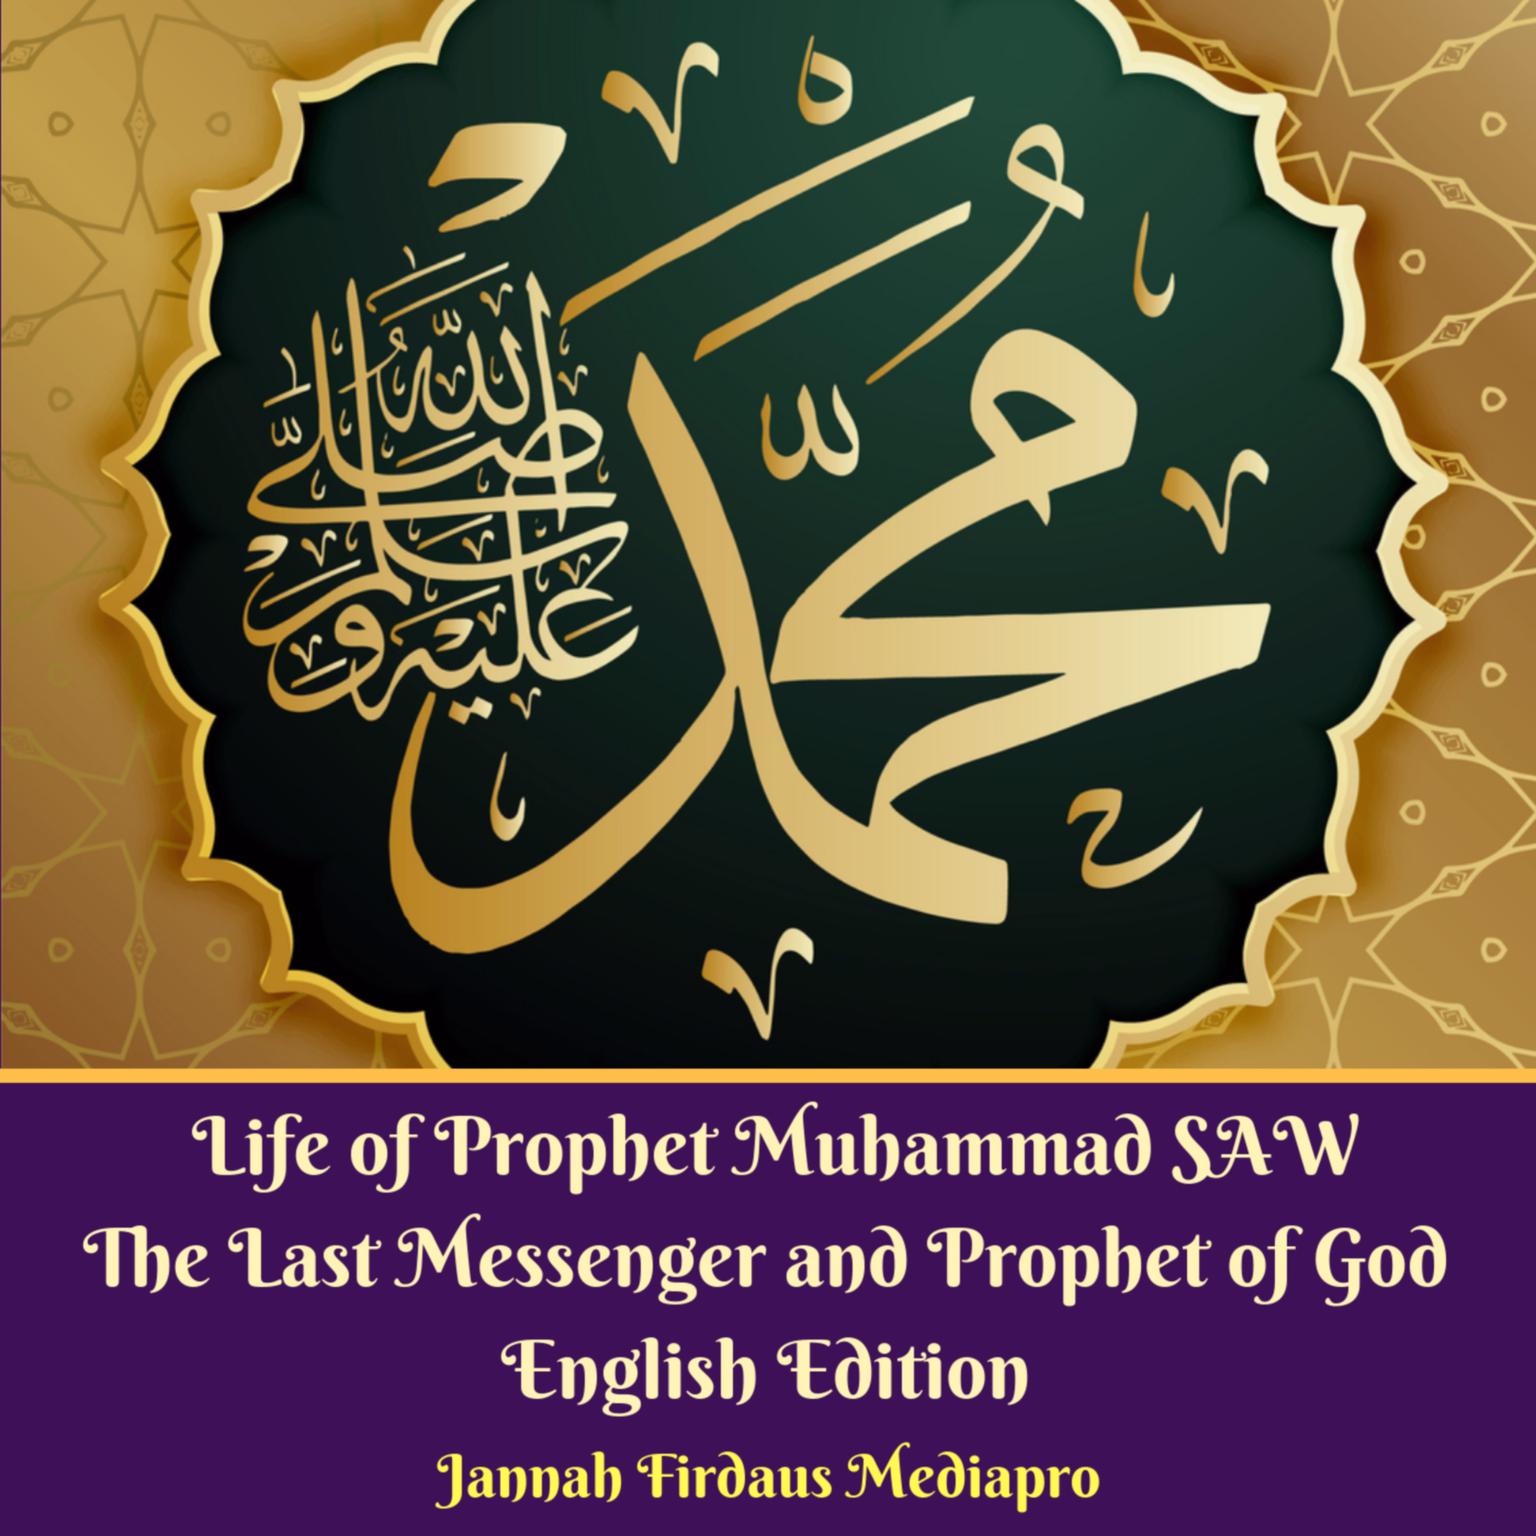 Life of Prophet Muhammad SAW (Abridged): The Last Messenger and Prophet of God English Edition Audiobook, by Jannah Firdaus Foundation